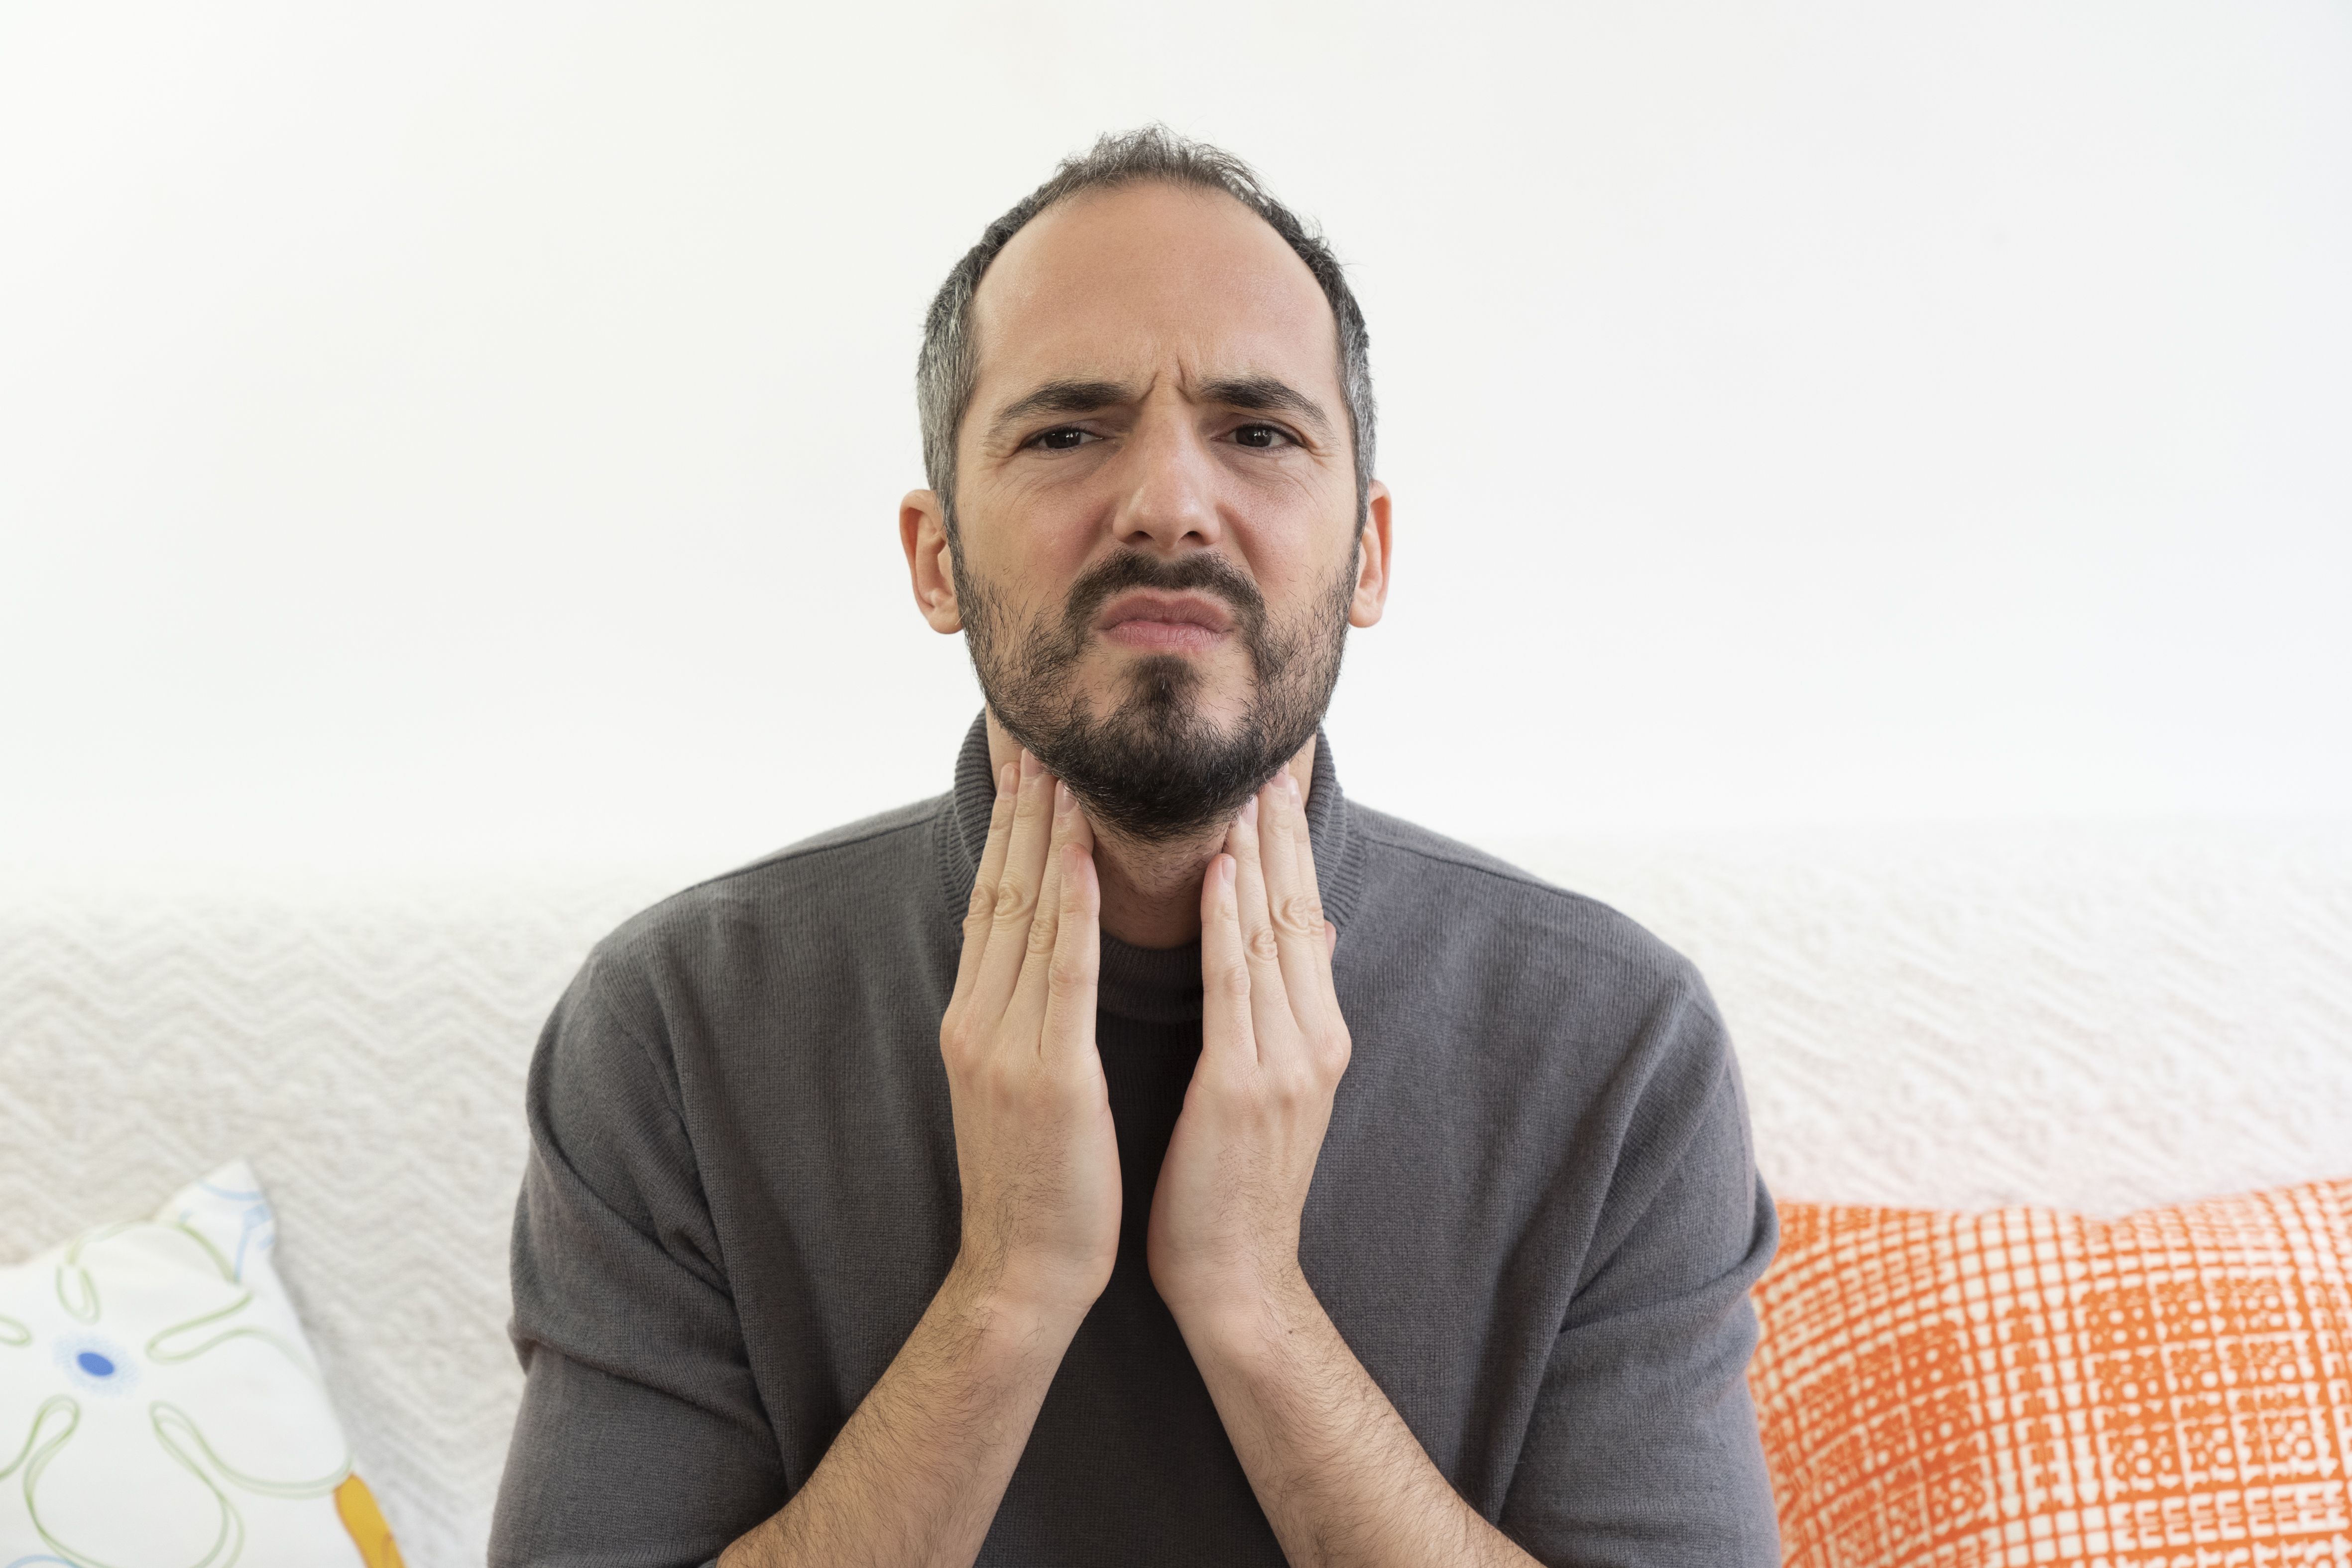 Why Does My Throat Burn? - Causes of a Sore, Burning Throat